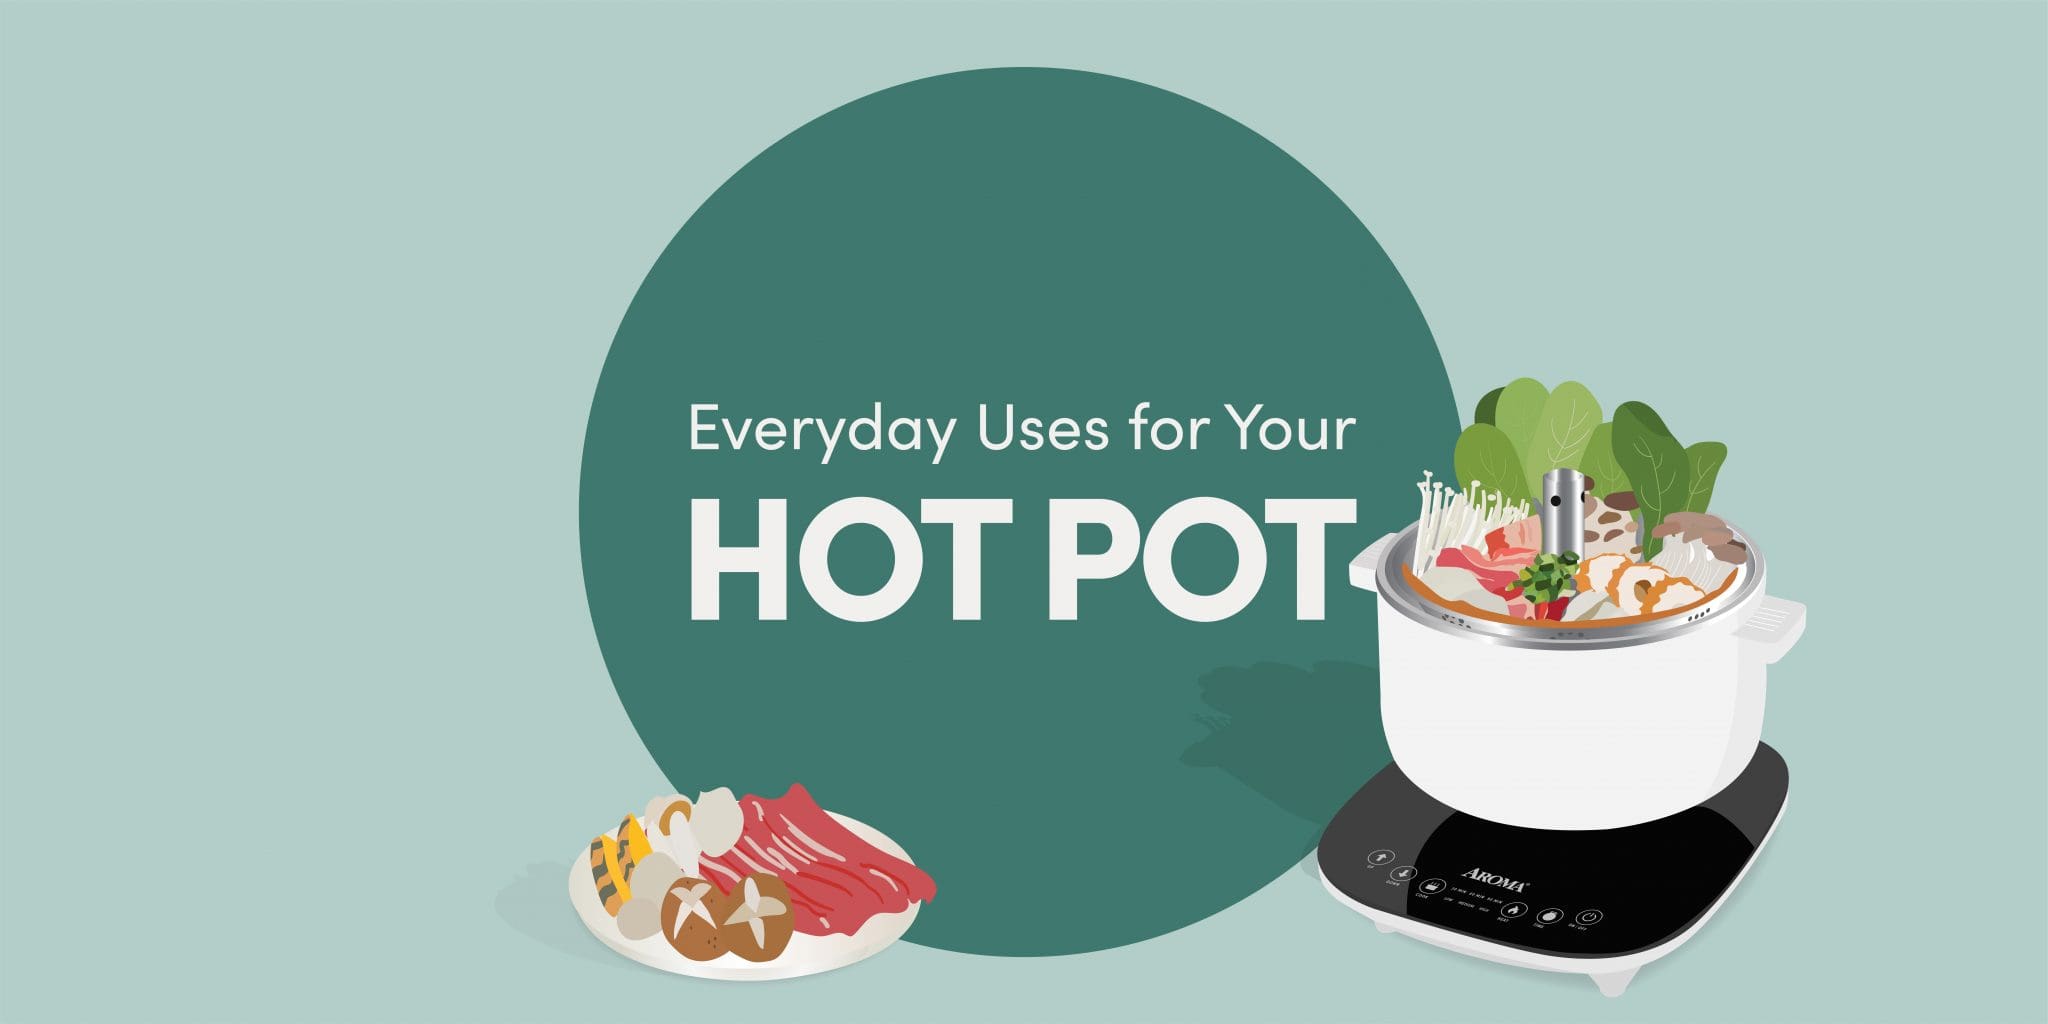 https://www.aromaco.com/wp-content/uploads/2023/03/Everyday-Uses-for-Your-Hot-Pot.jpg